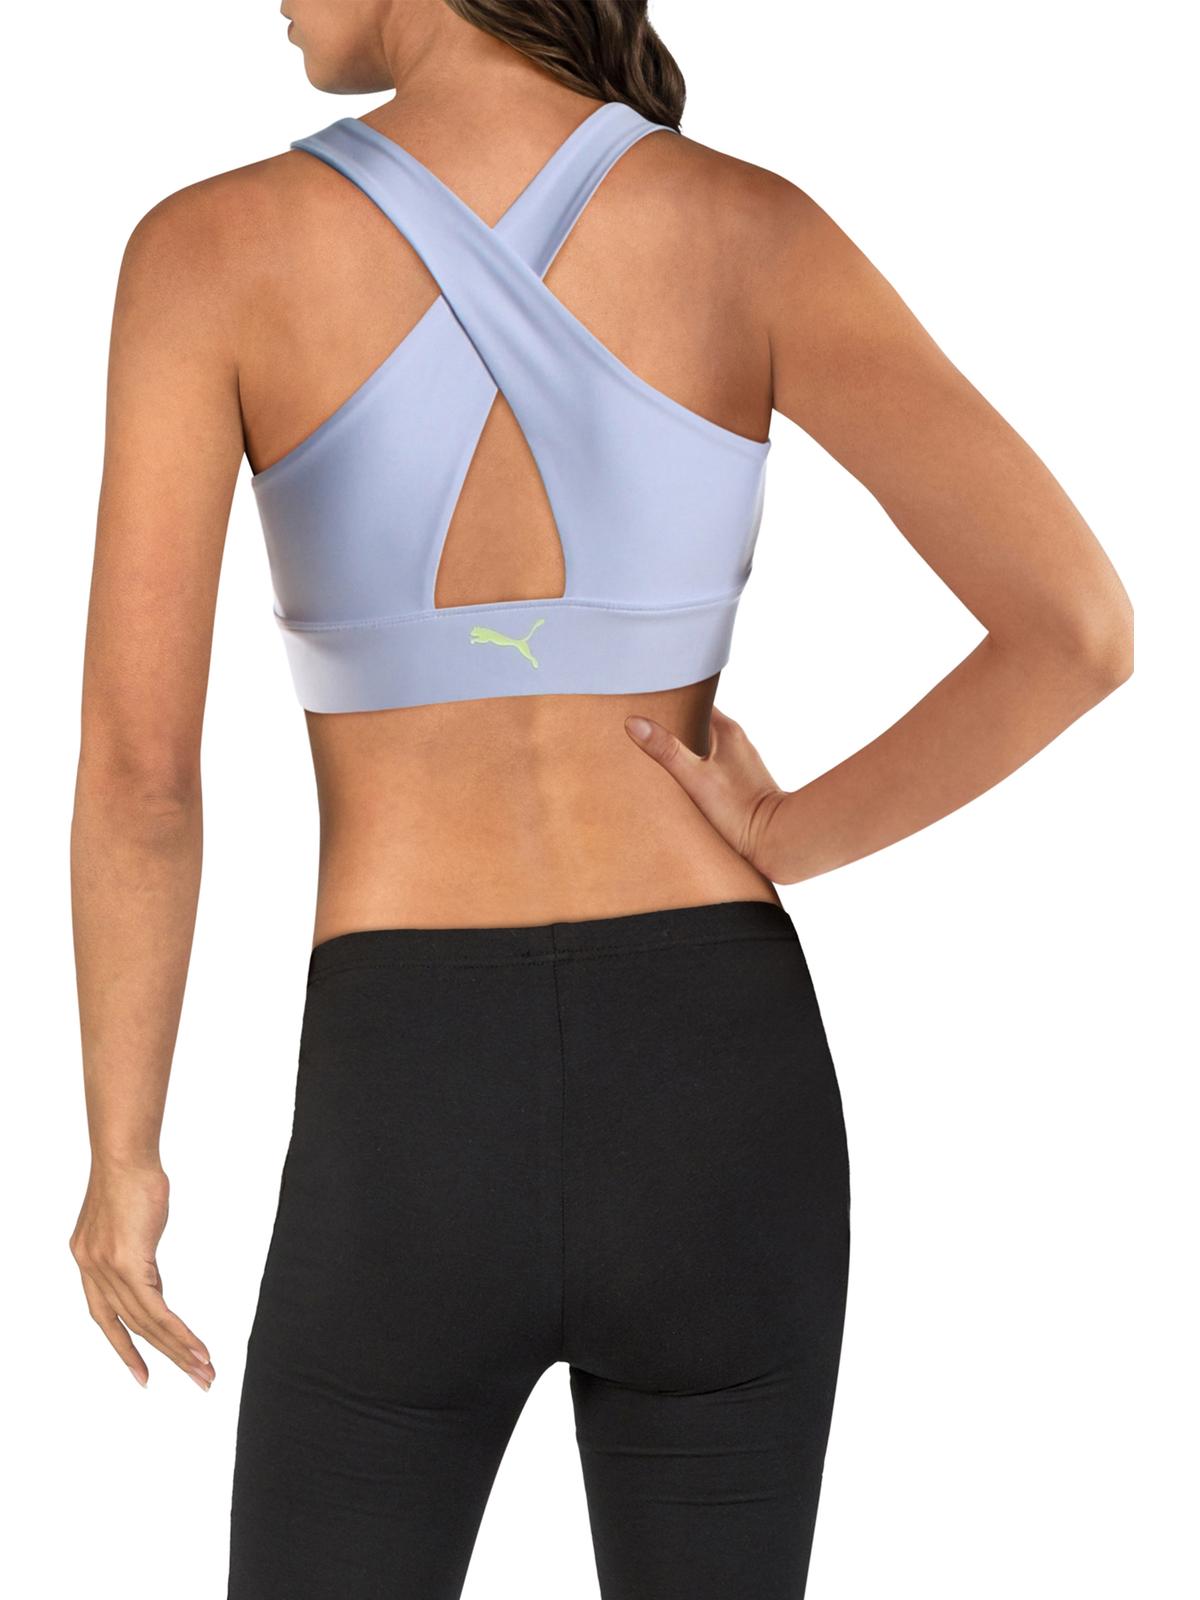 Puma Womens Evide Running Fitness Crop Top - image 2 of 2